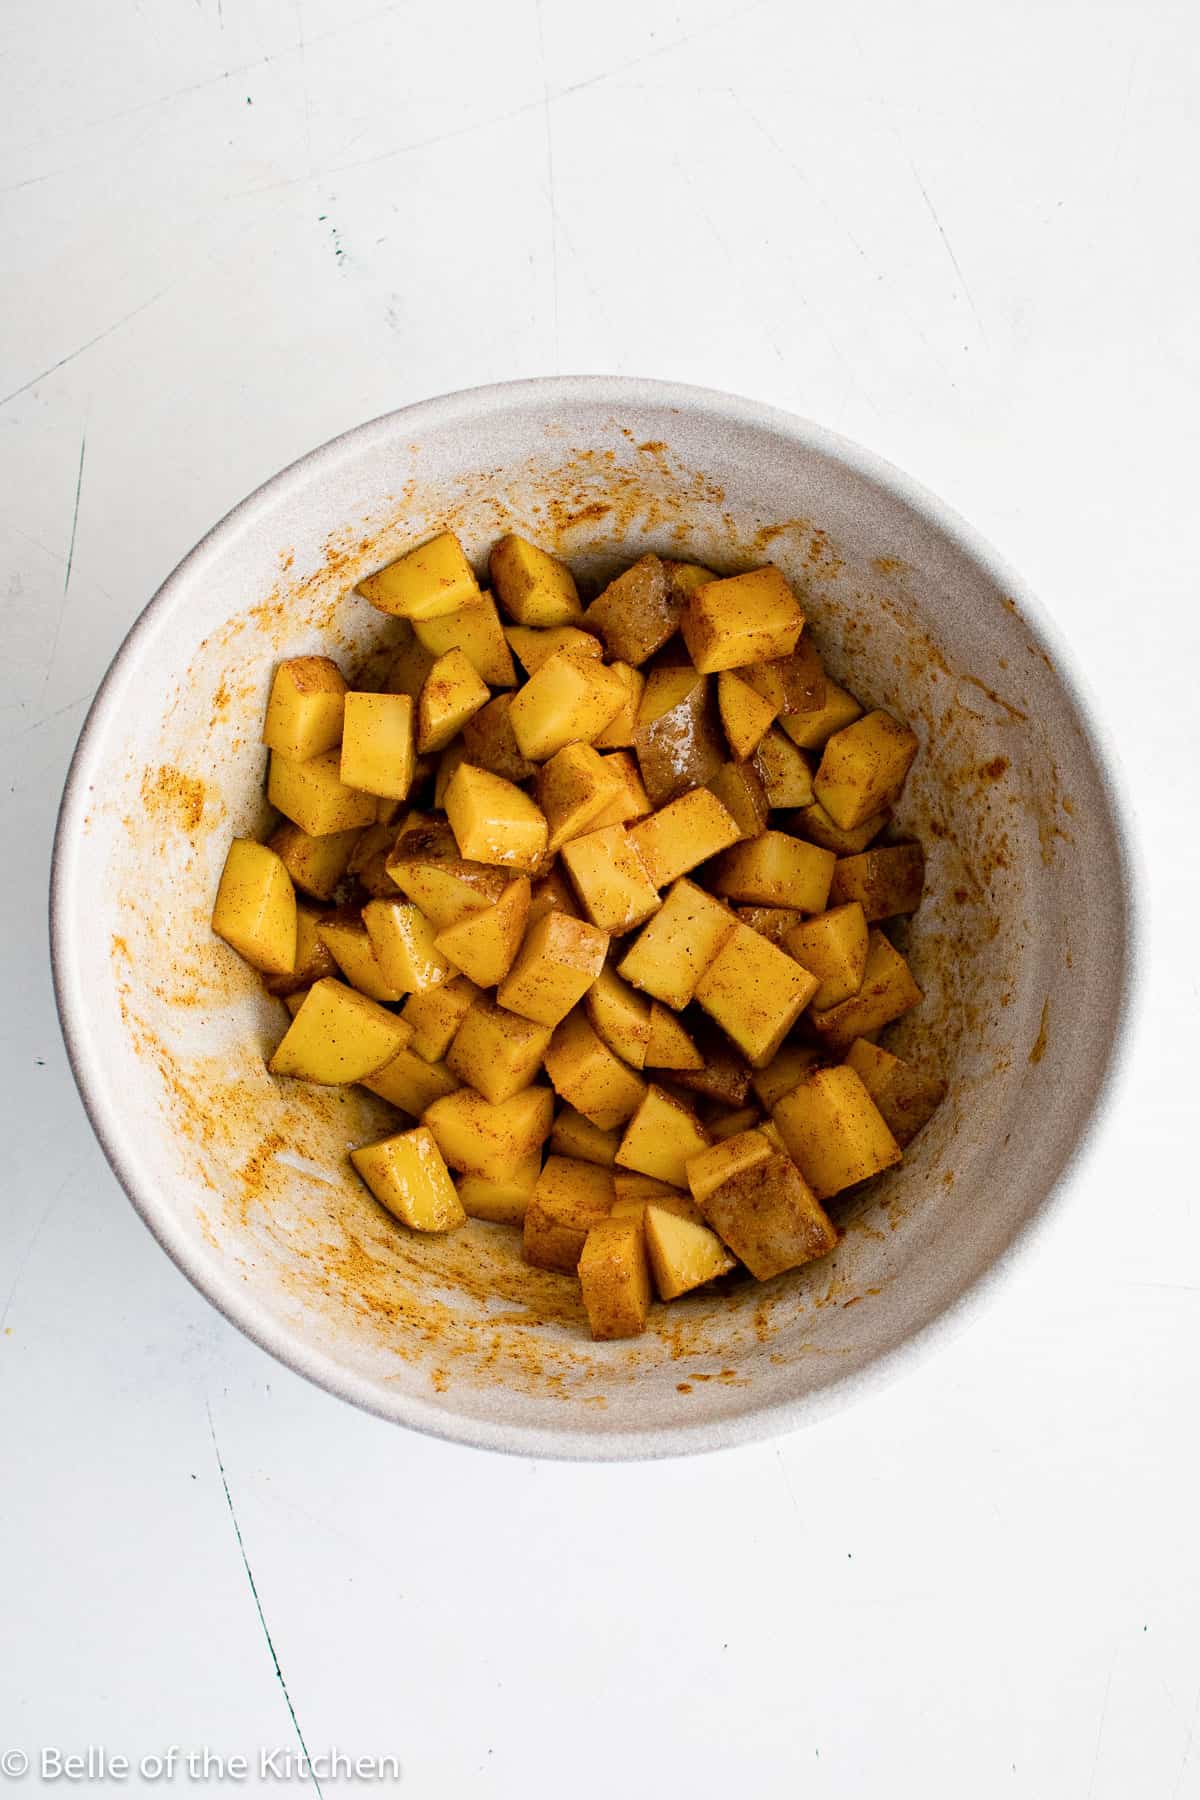 diced potatoes and spices in a white bowl.